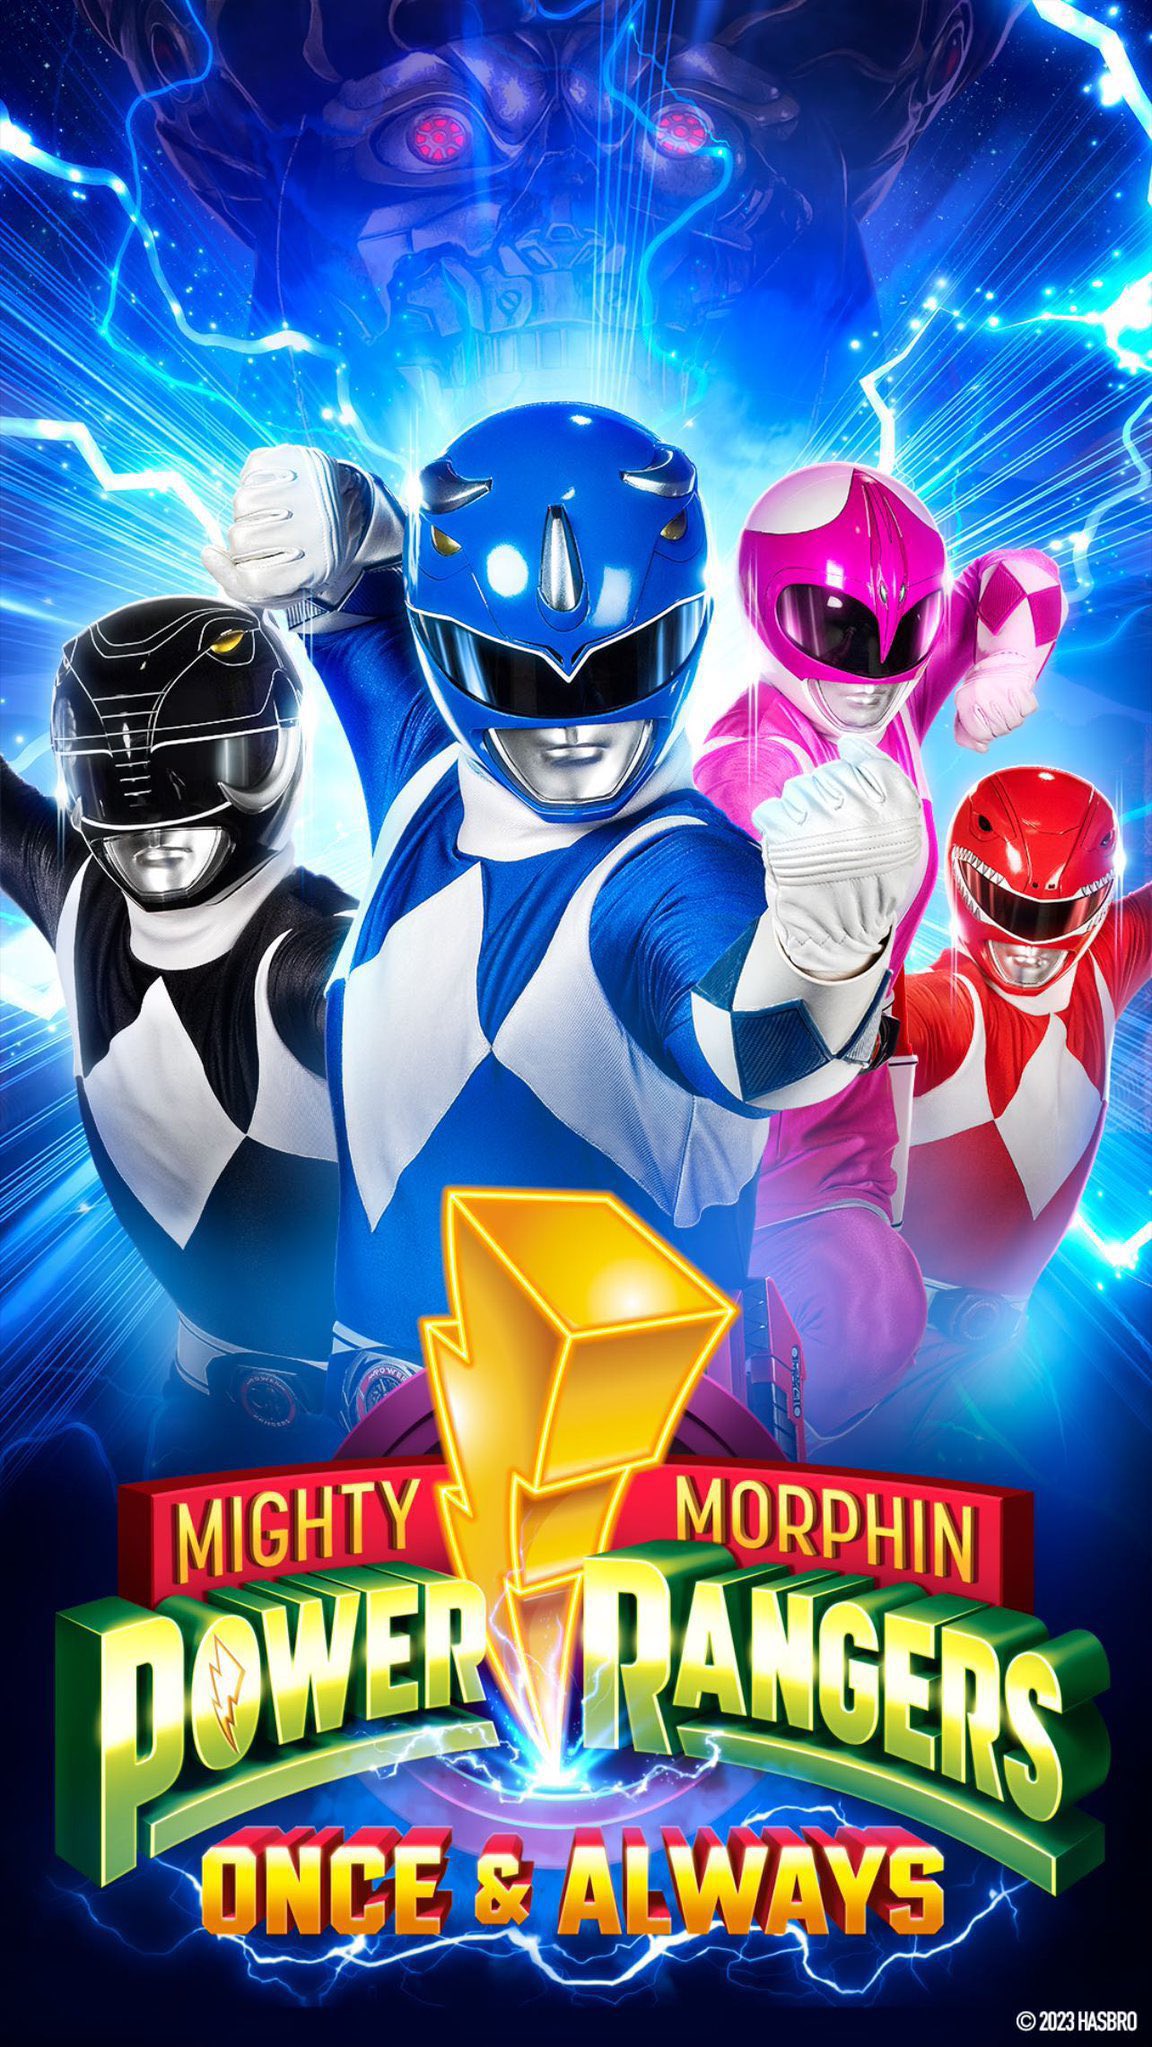 https://static.wikia.nocookie.net/powerrangers/images/2/21/MMPR_Once_%26_Always_Poster.jpg/revision/latest?cb=20230315000426